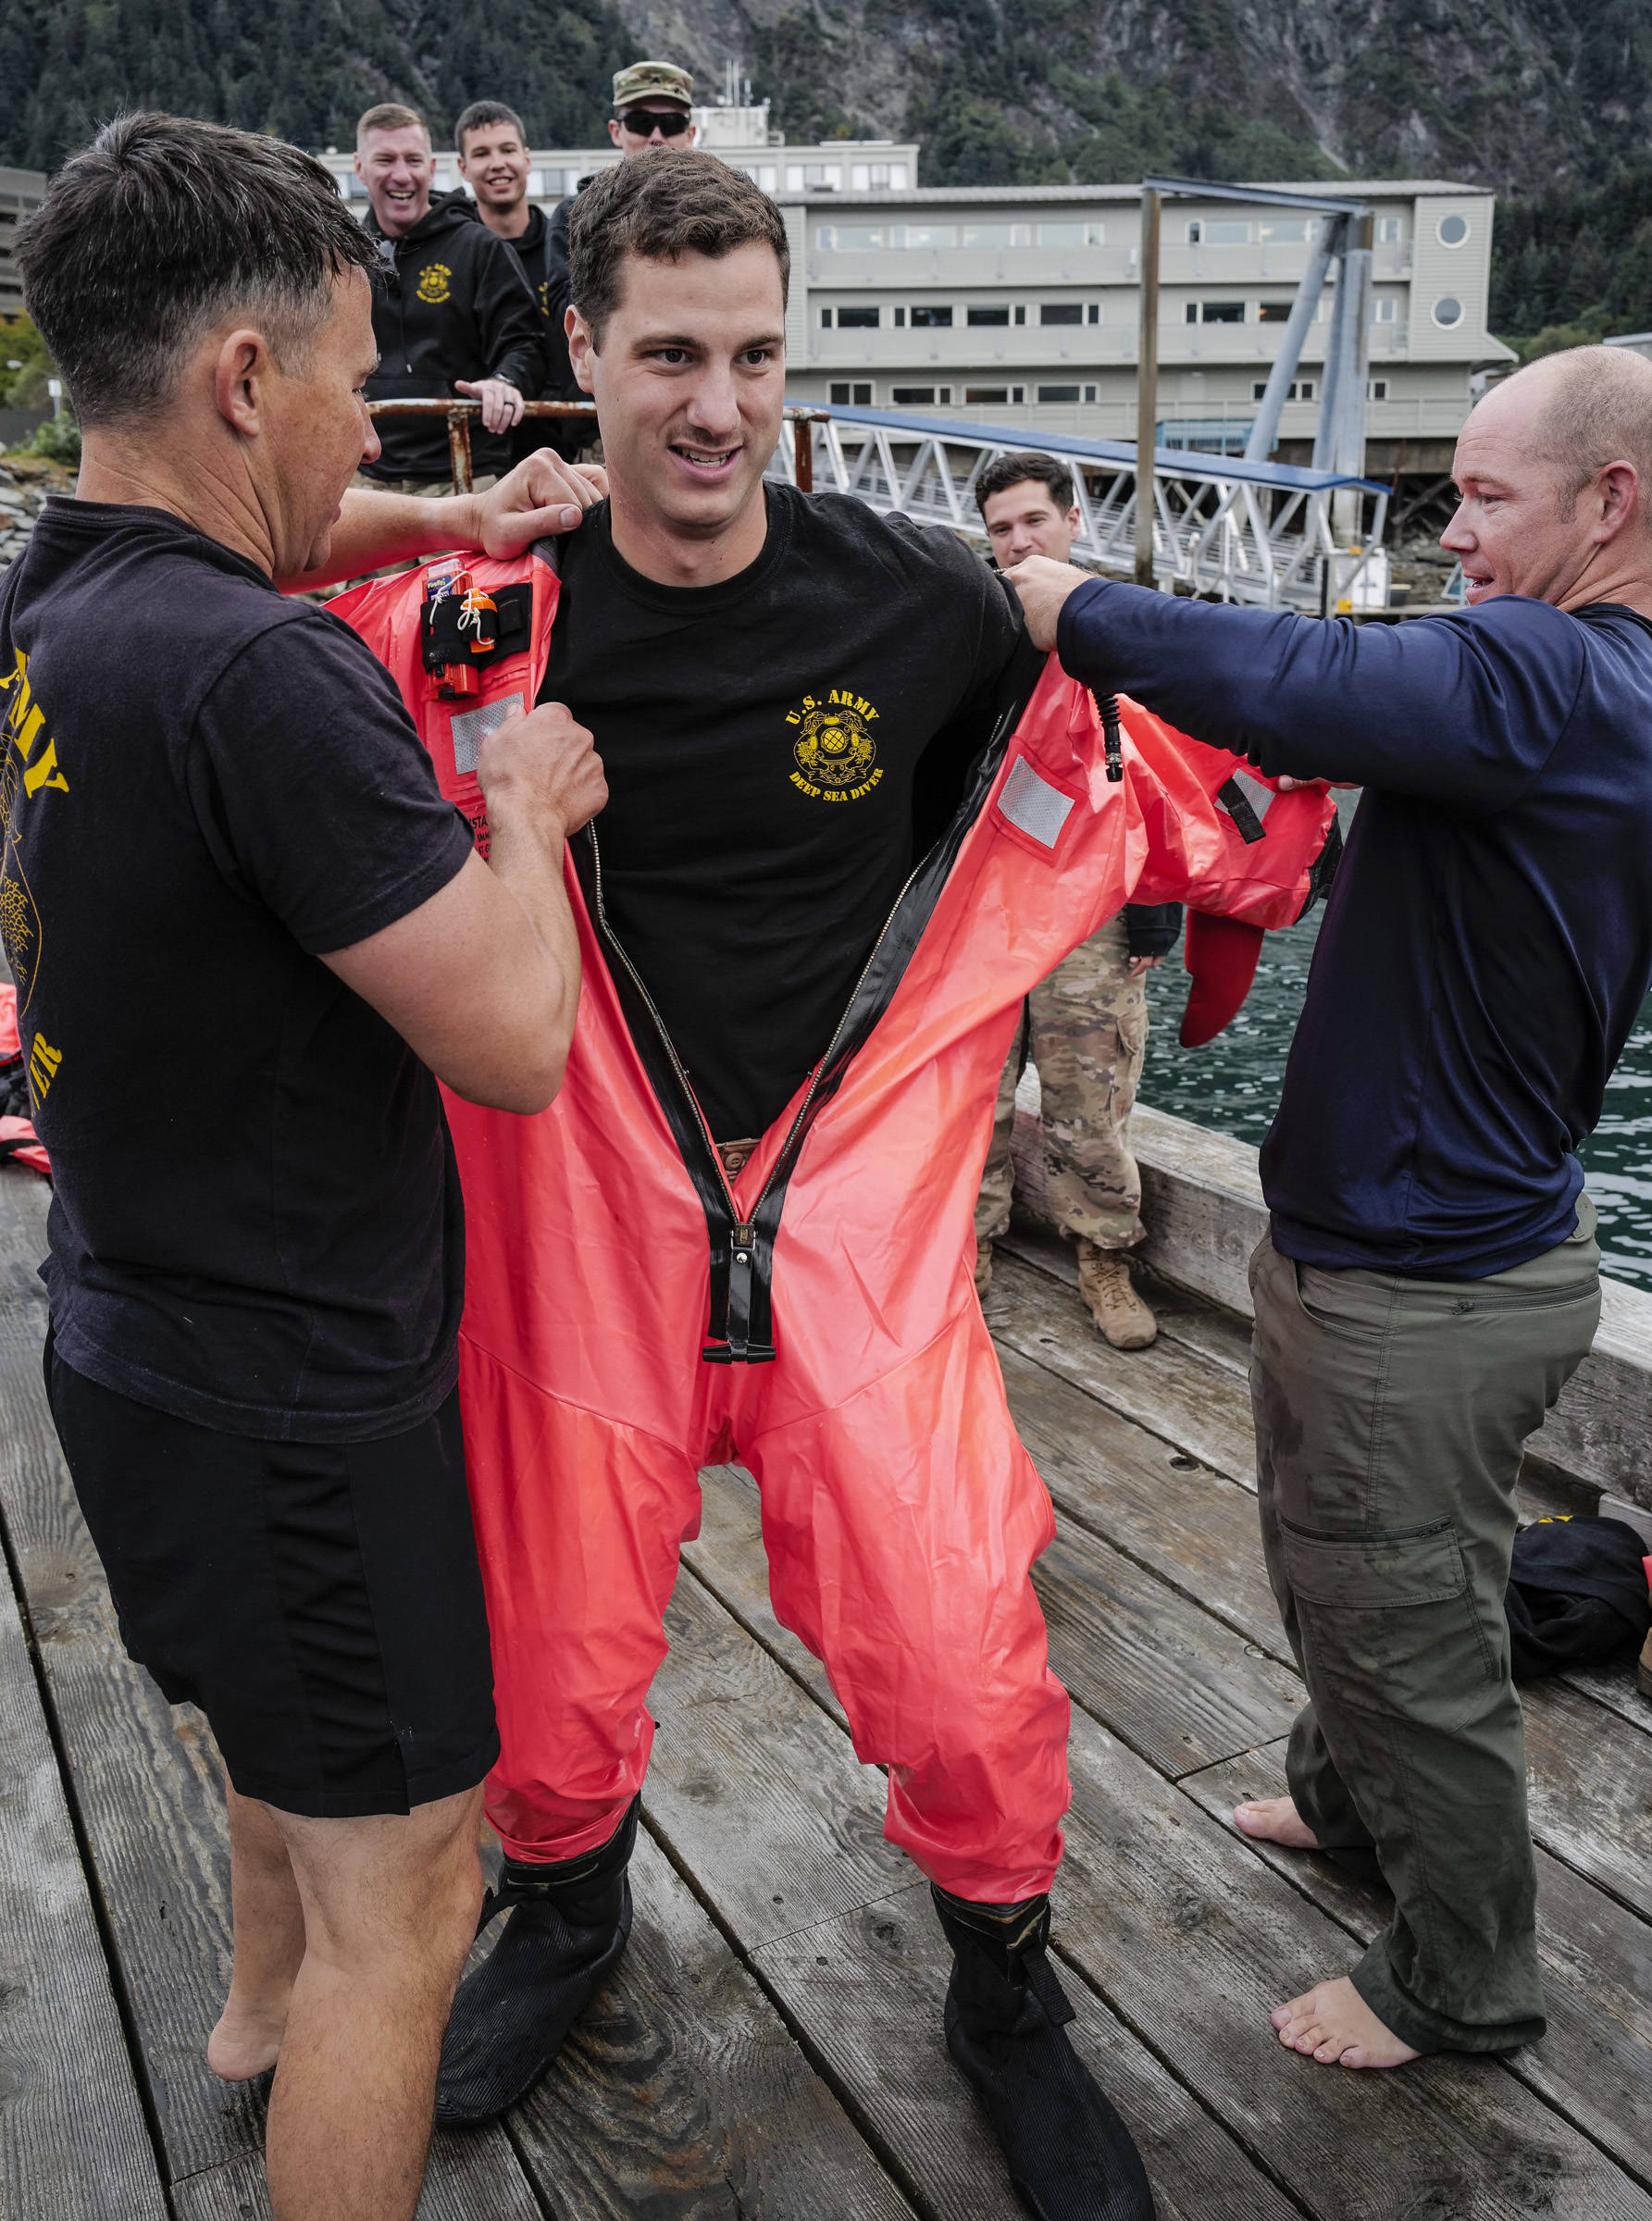 Brett Hyde, of the U.S. Army Dive Team, center, is helped into his survival suit by teammates Daniel Byrd, left, and Shawn Price during the annual Buoy Tender Olympics at Station Juneau on Wednesday, Aug. 21, 2019. (Michael Penn | Juneau Empire)